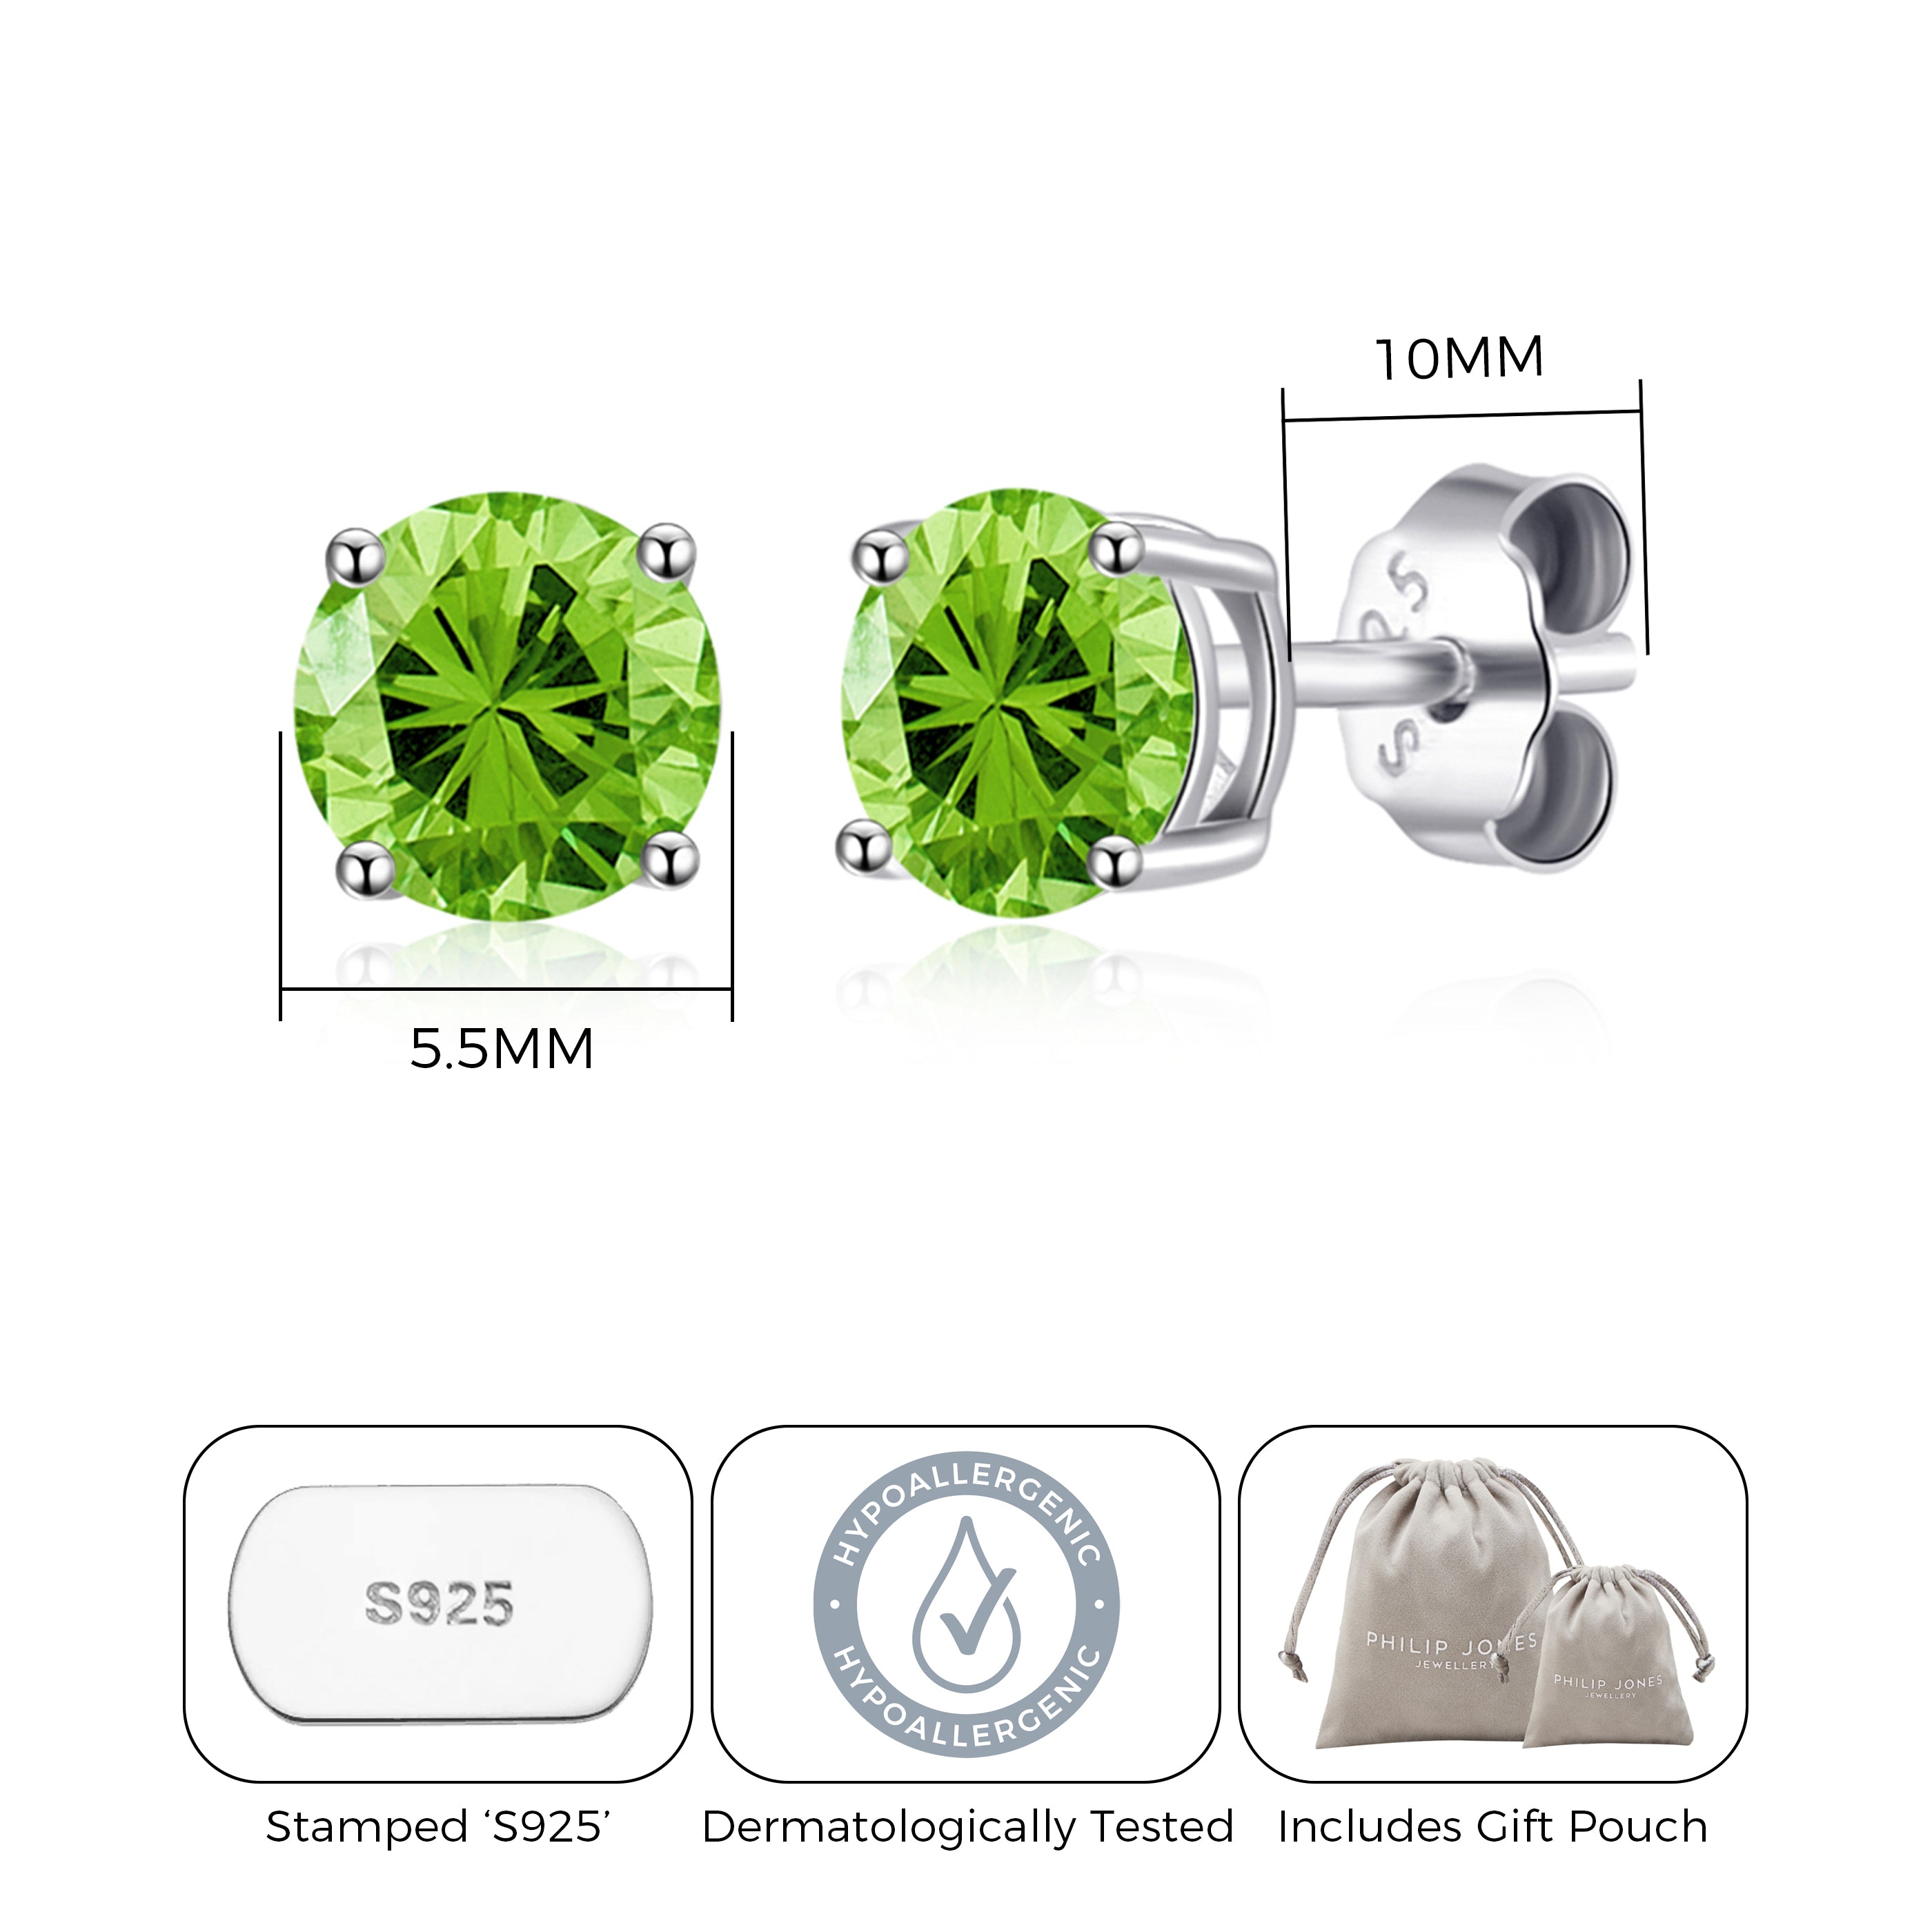 Sterling Silver August (Peridot) Birthstone Earrings Created with Zircondia® Crystals